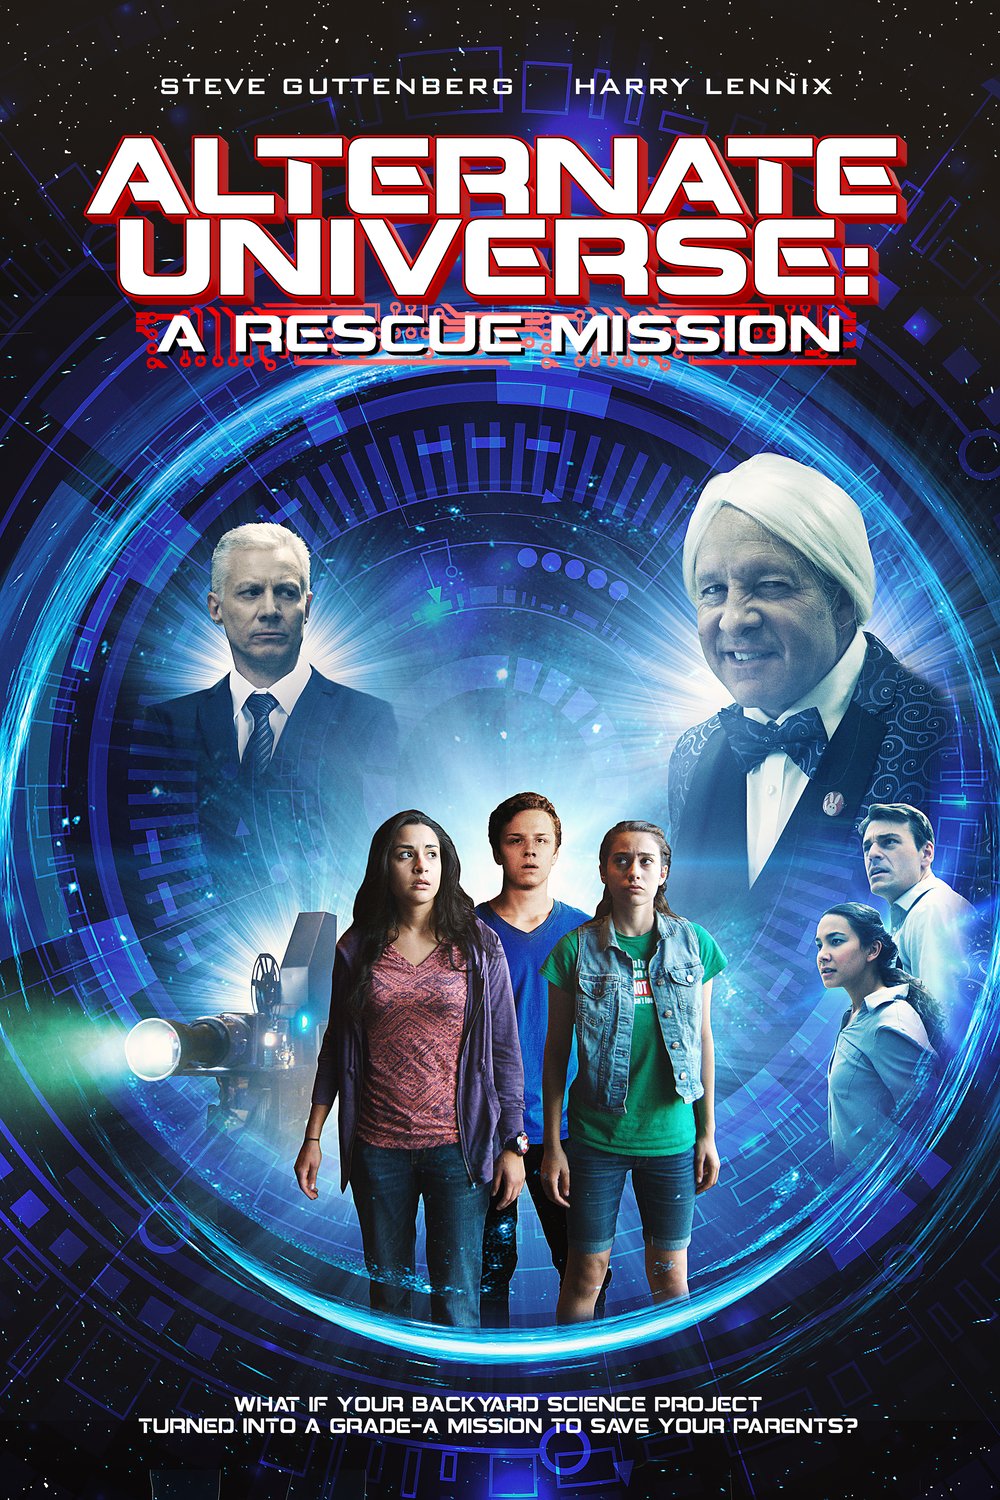 Poster of the movie Alternate Universe: A Rescue Mission